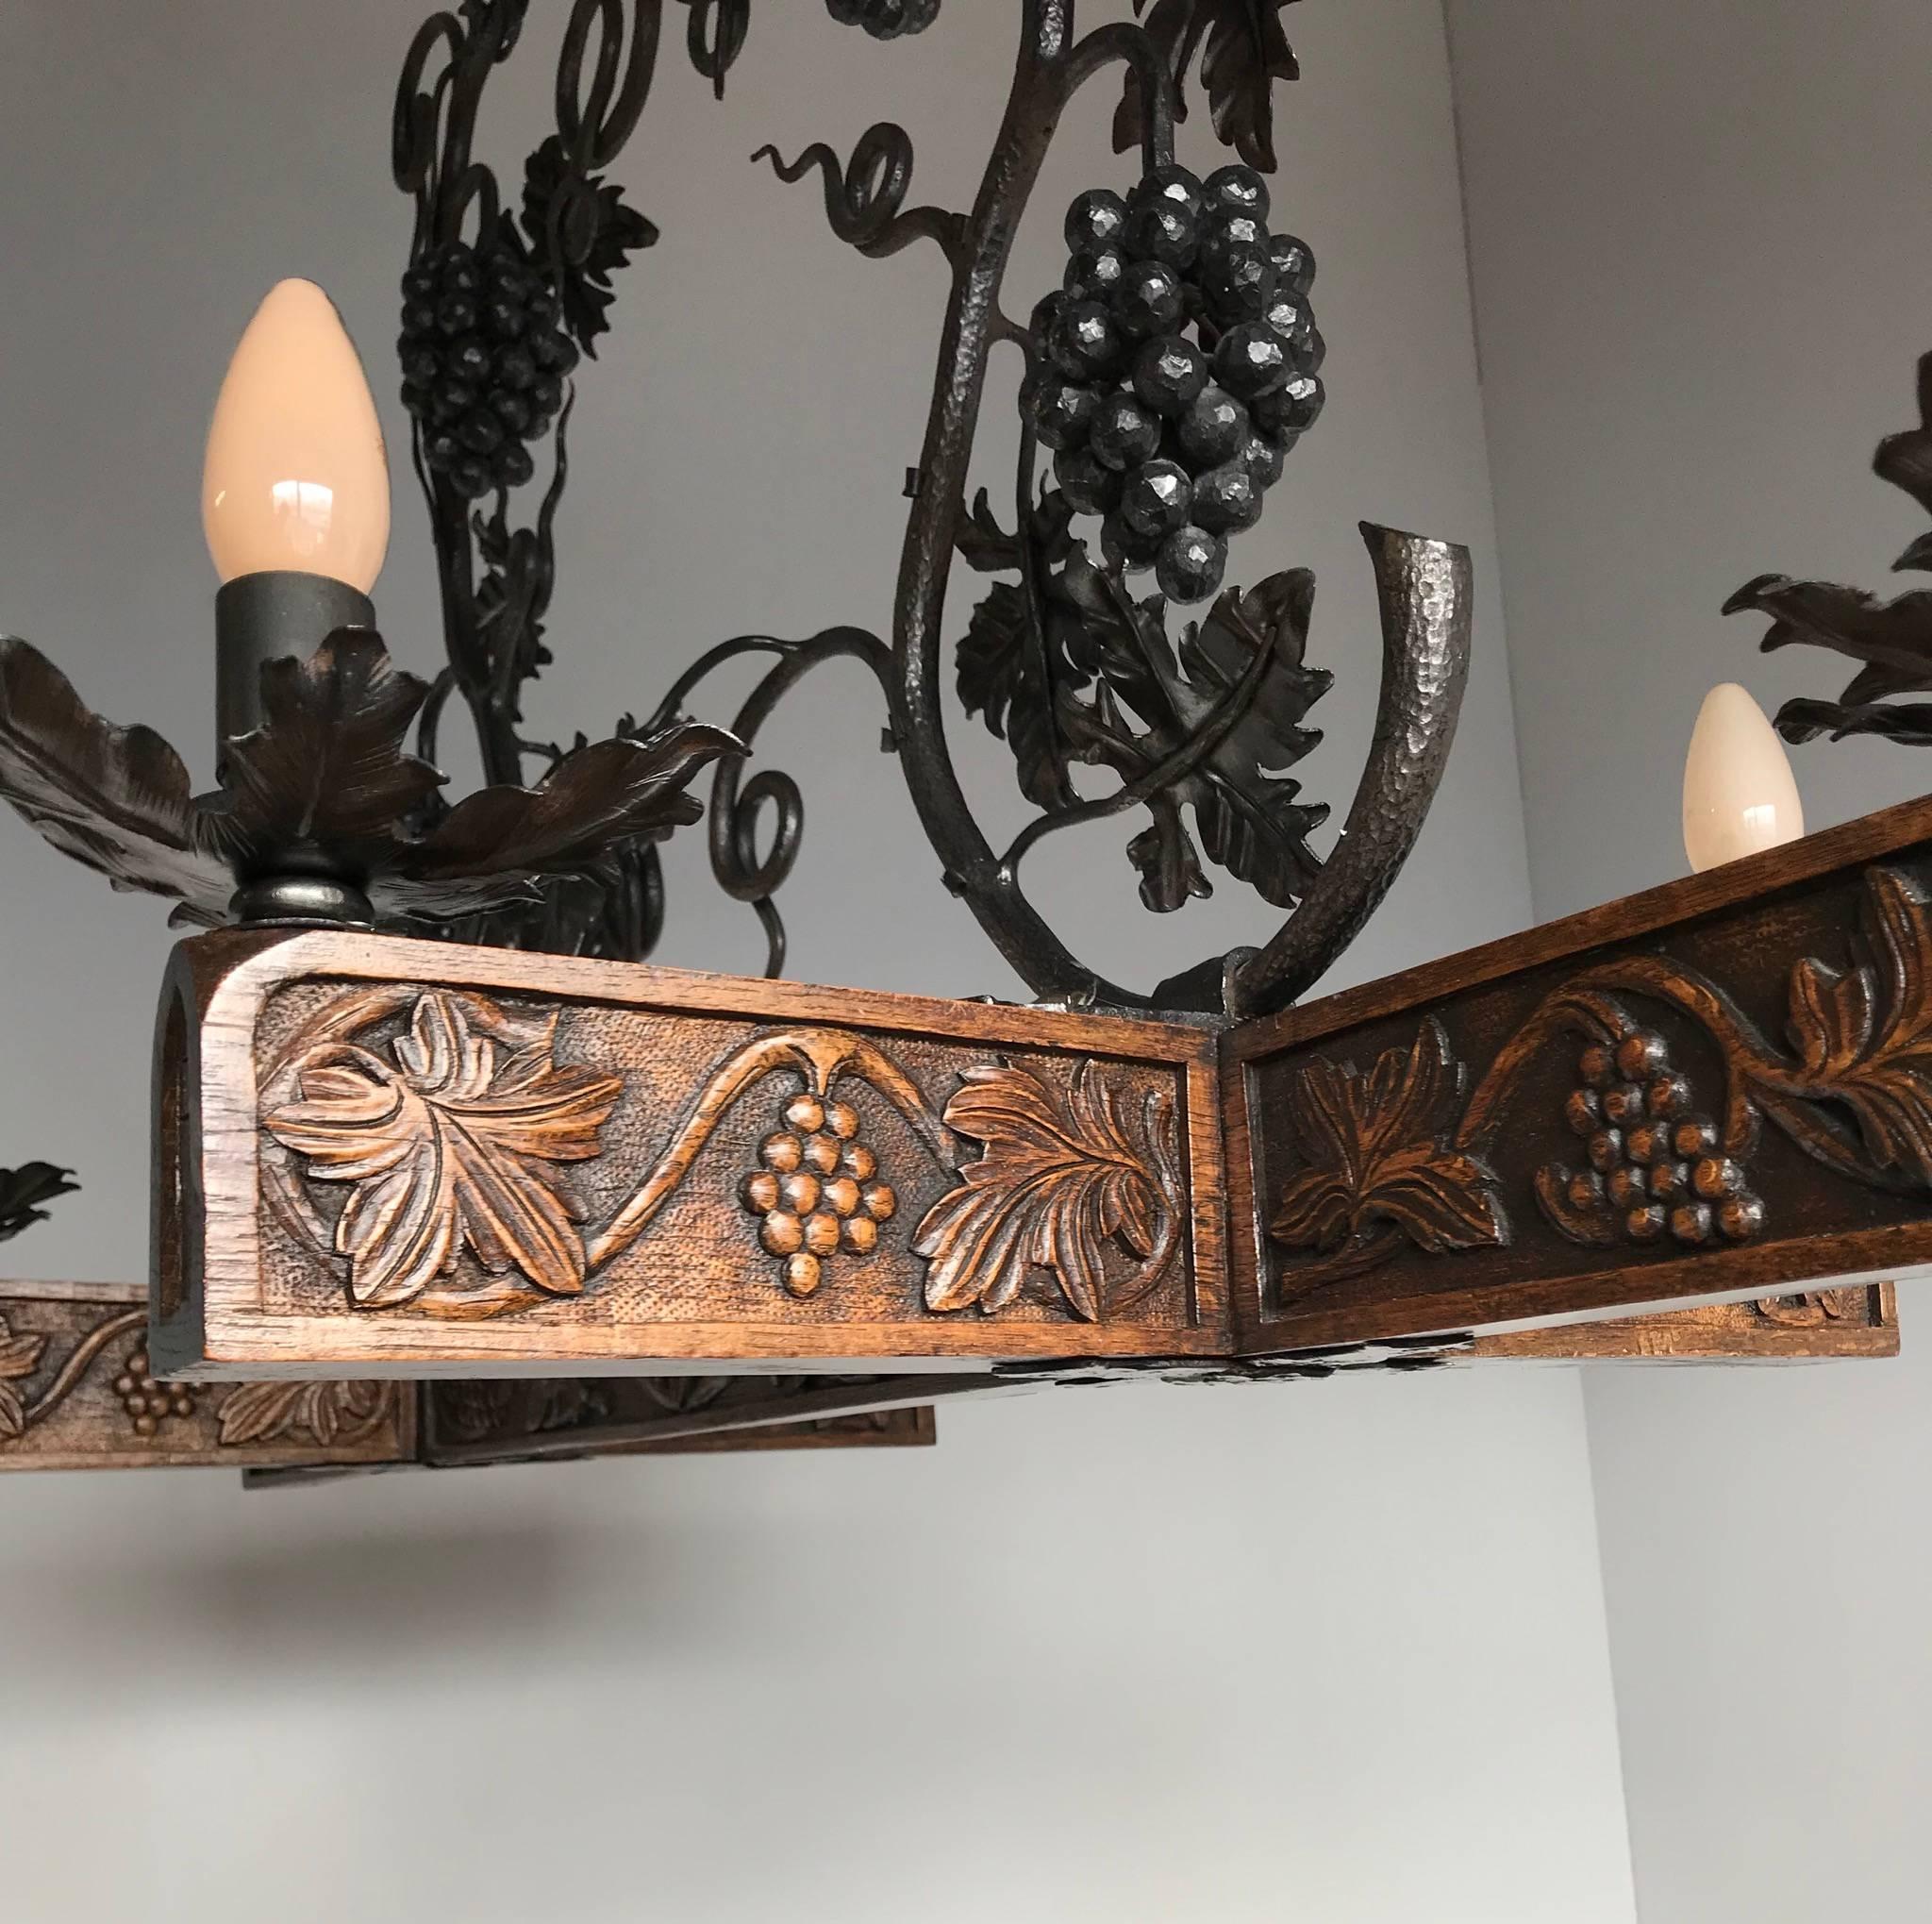 Hand-Crafted Stunning Horizontal Chandelier with Wrought Iron Grapes and Hand Carved Branches